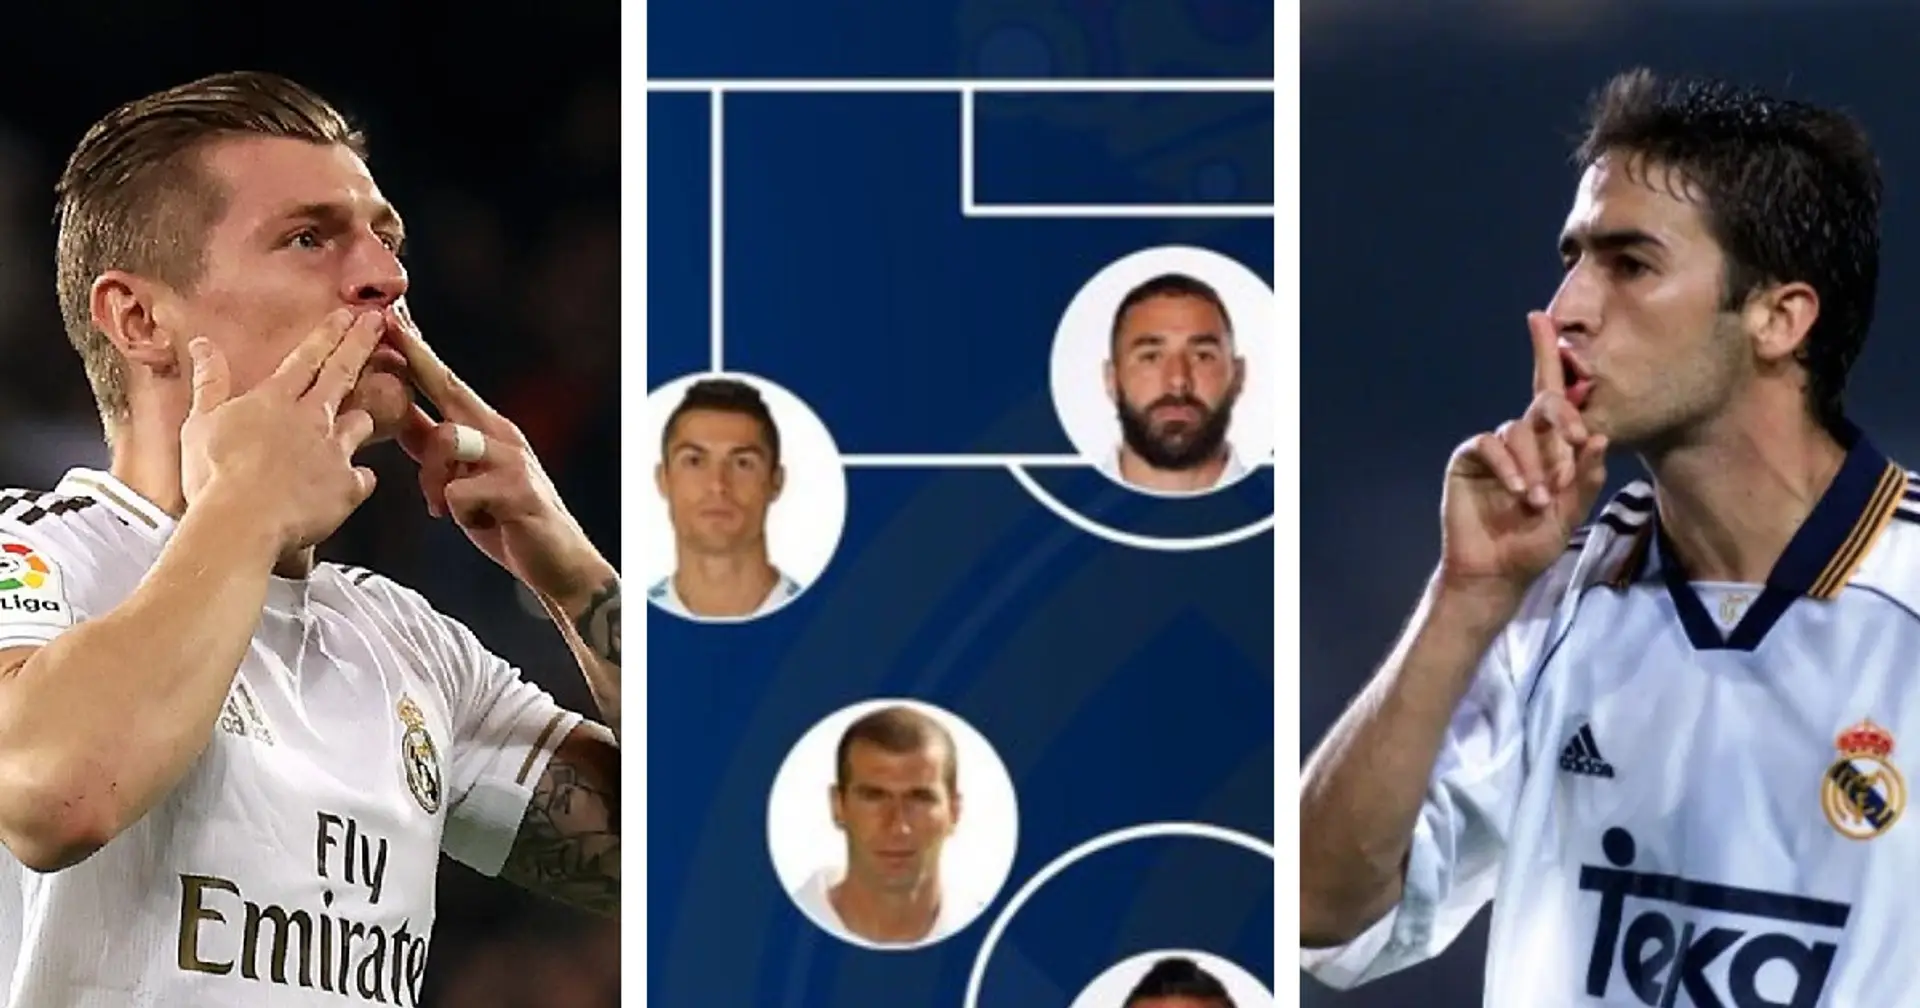 Real Madrid fans vote all-time starting XI - no Raul, Kroos or Di Stefano